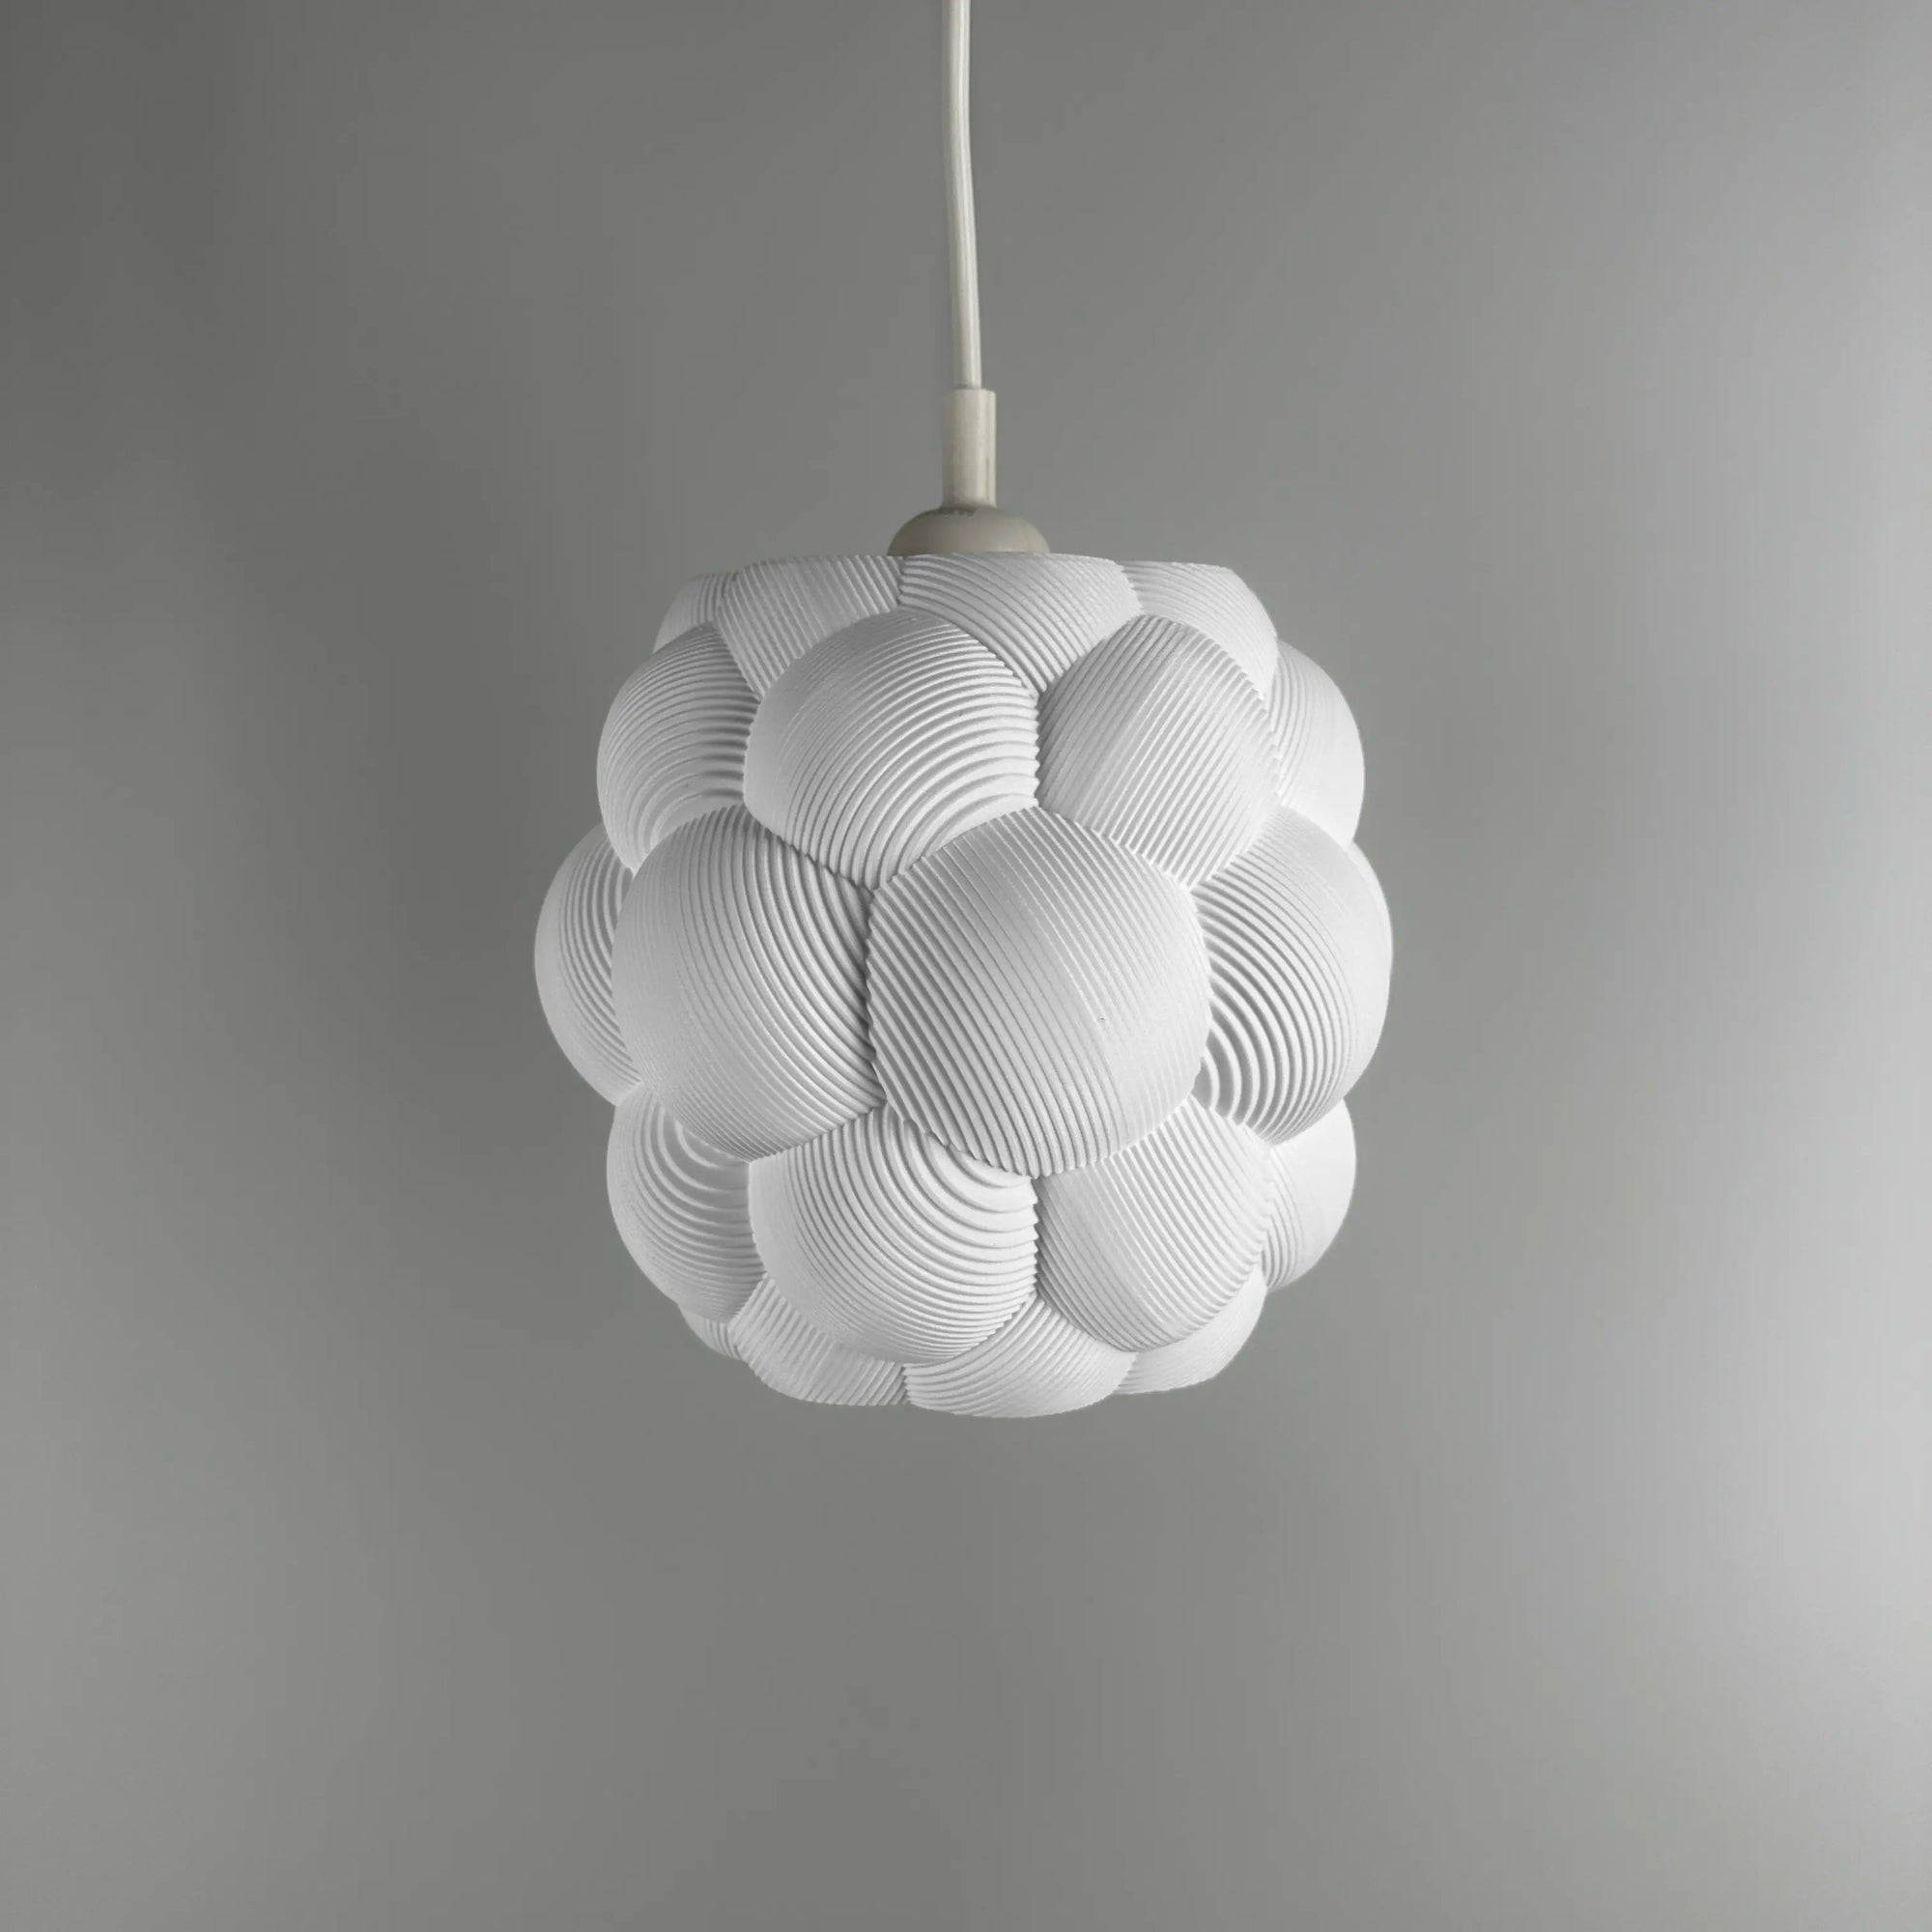 3D printed Apo Malli lampshade in modern design in cotton white biodegradable material.